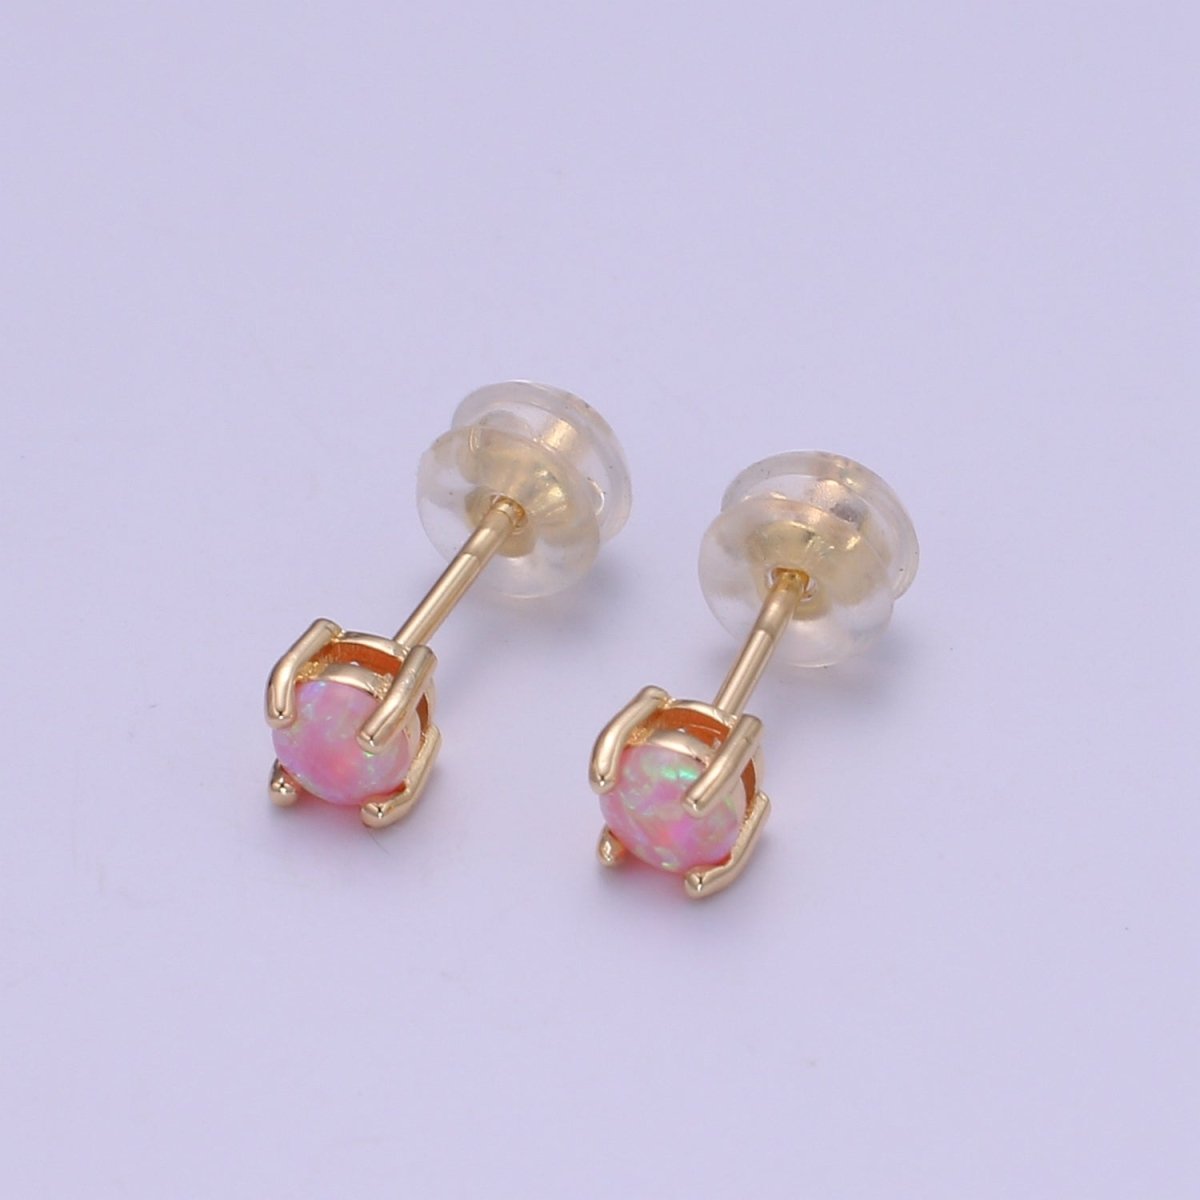 Minimalist Opal Stud Earrings in 18k Gold Filled Earring Pink Blue White Opal, Tiny Circle Dot Jewelry Dainty Stud Earring for gift P-073~P-075 - DLUXCA